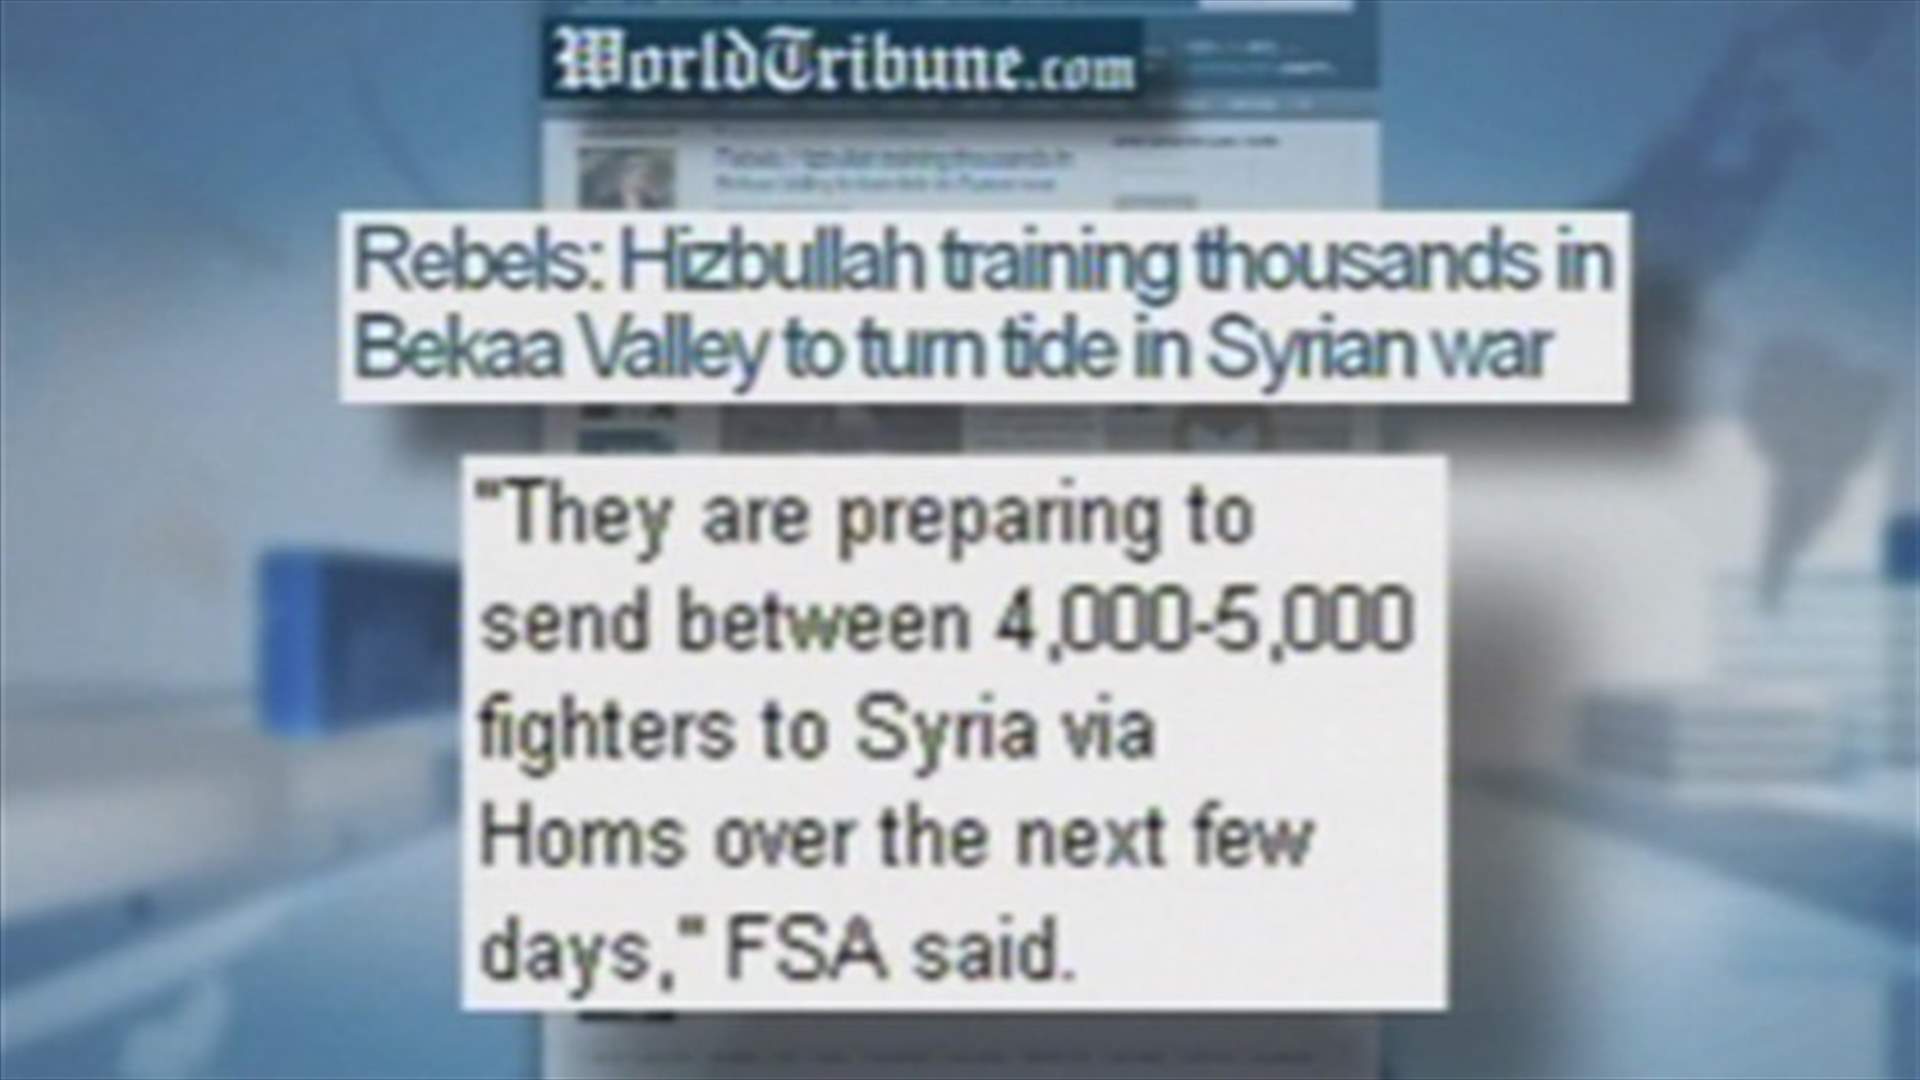 Rebels: Hezbollah training thousands in Bekaa Valley to turn tide in Syrian war